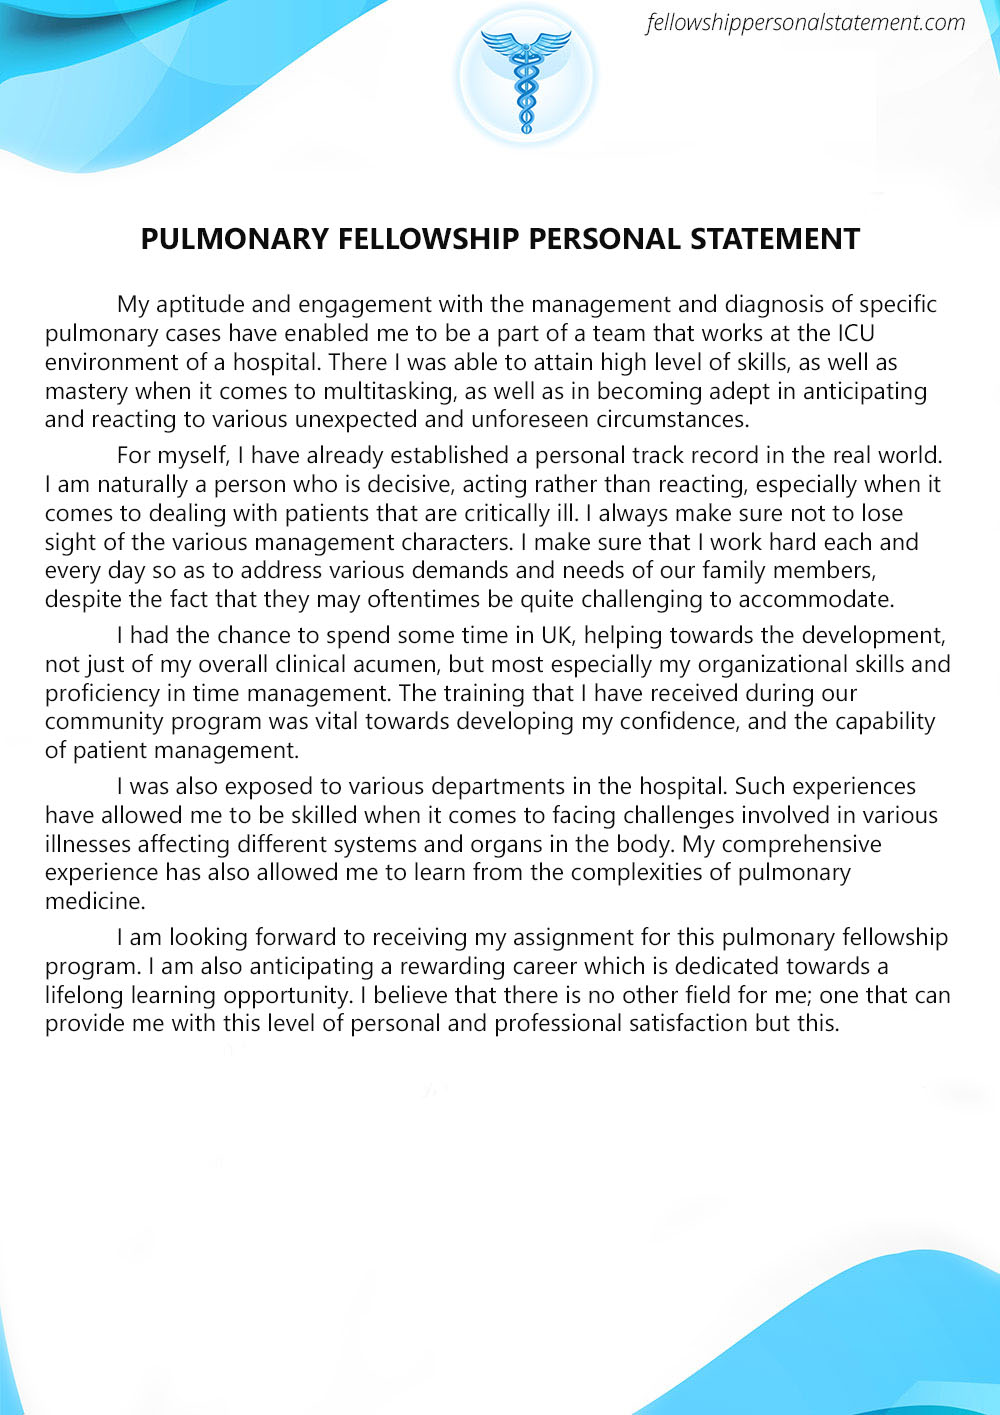 Personal statement for fellowship